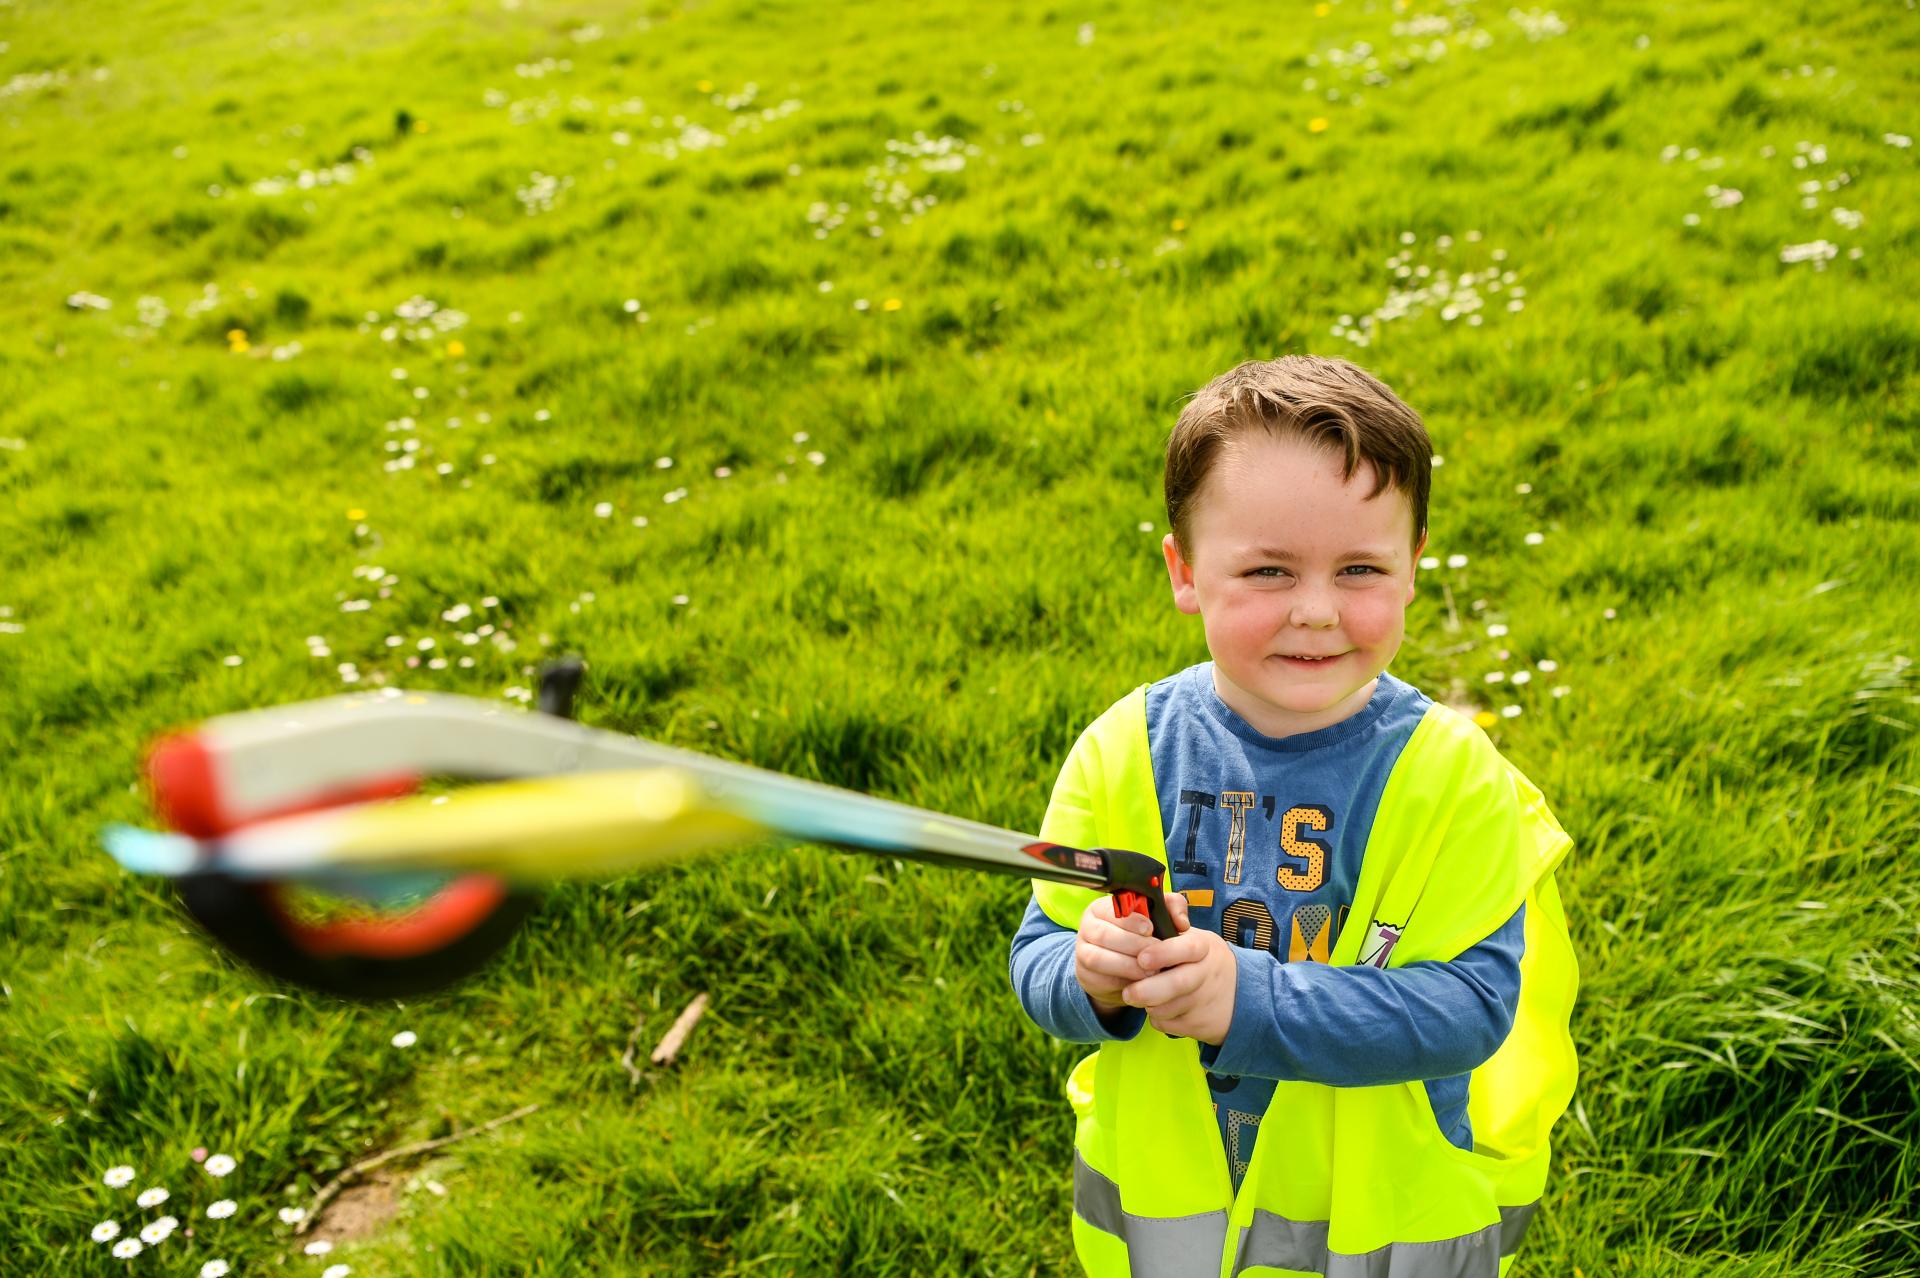 A child with a litter picker holding rubbish